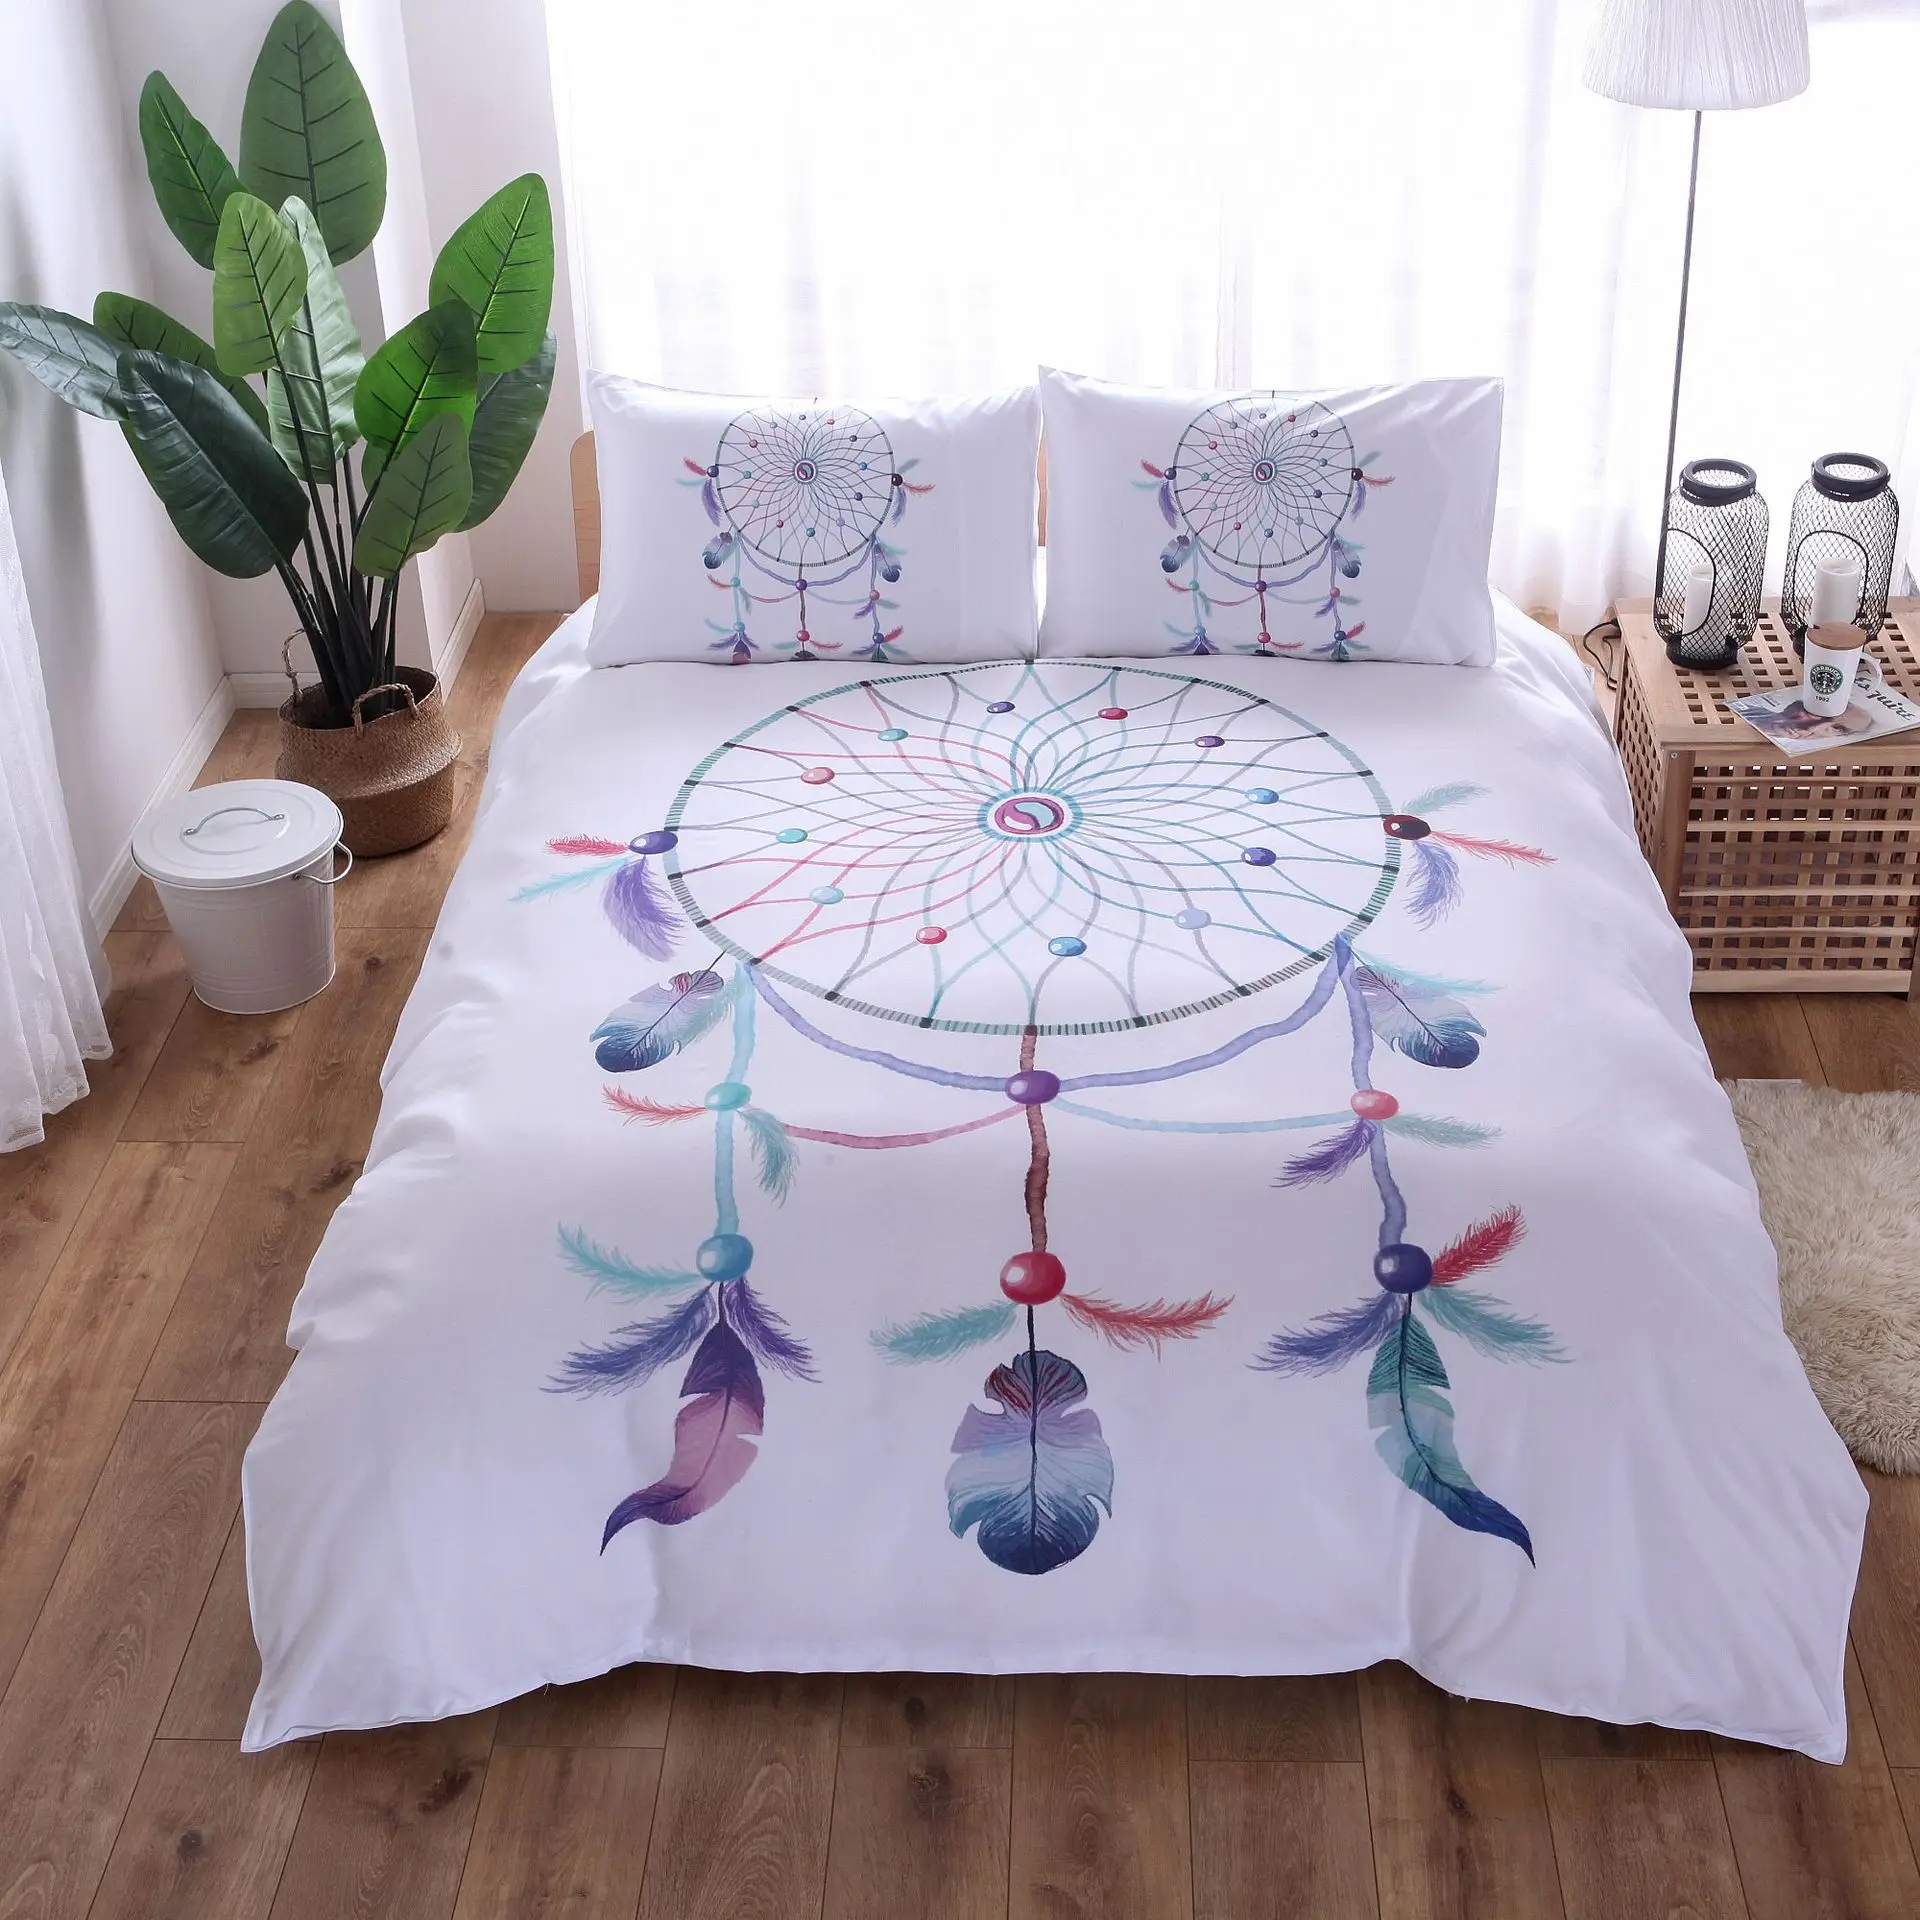 Watercolor Dreamcatcher Bedding Set Queen Size Pink Quilt Cover With Pillowcases 